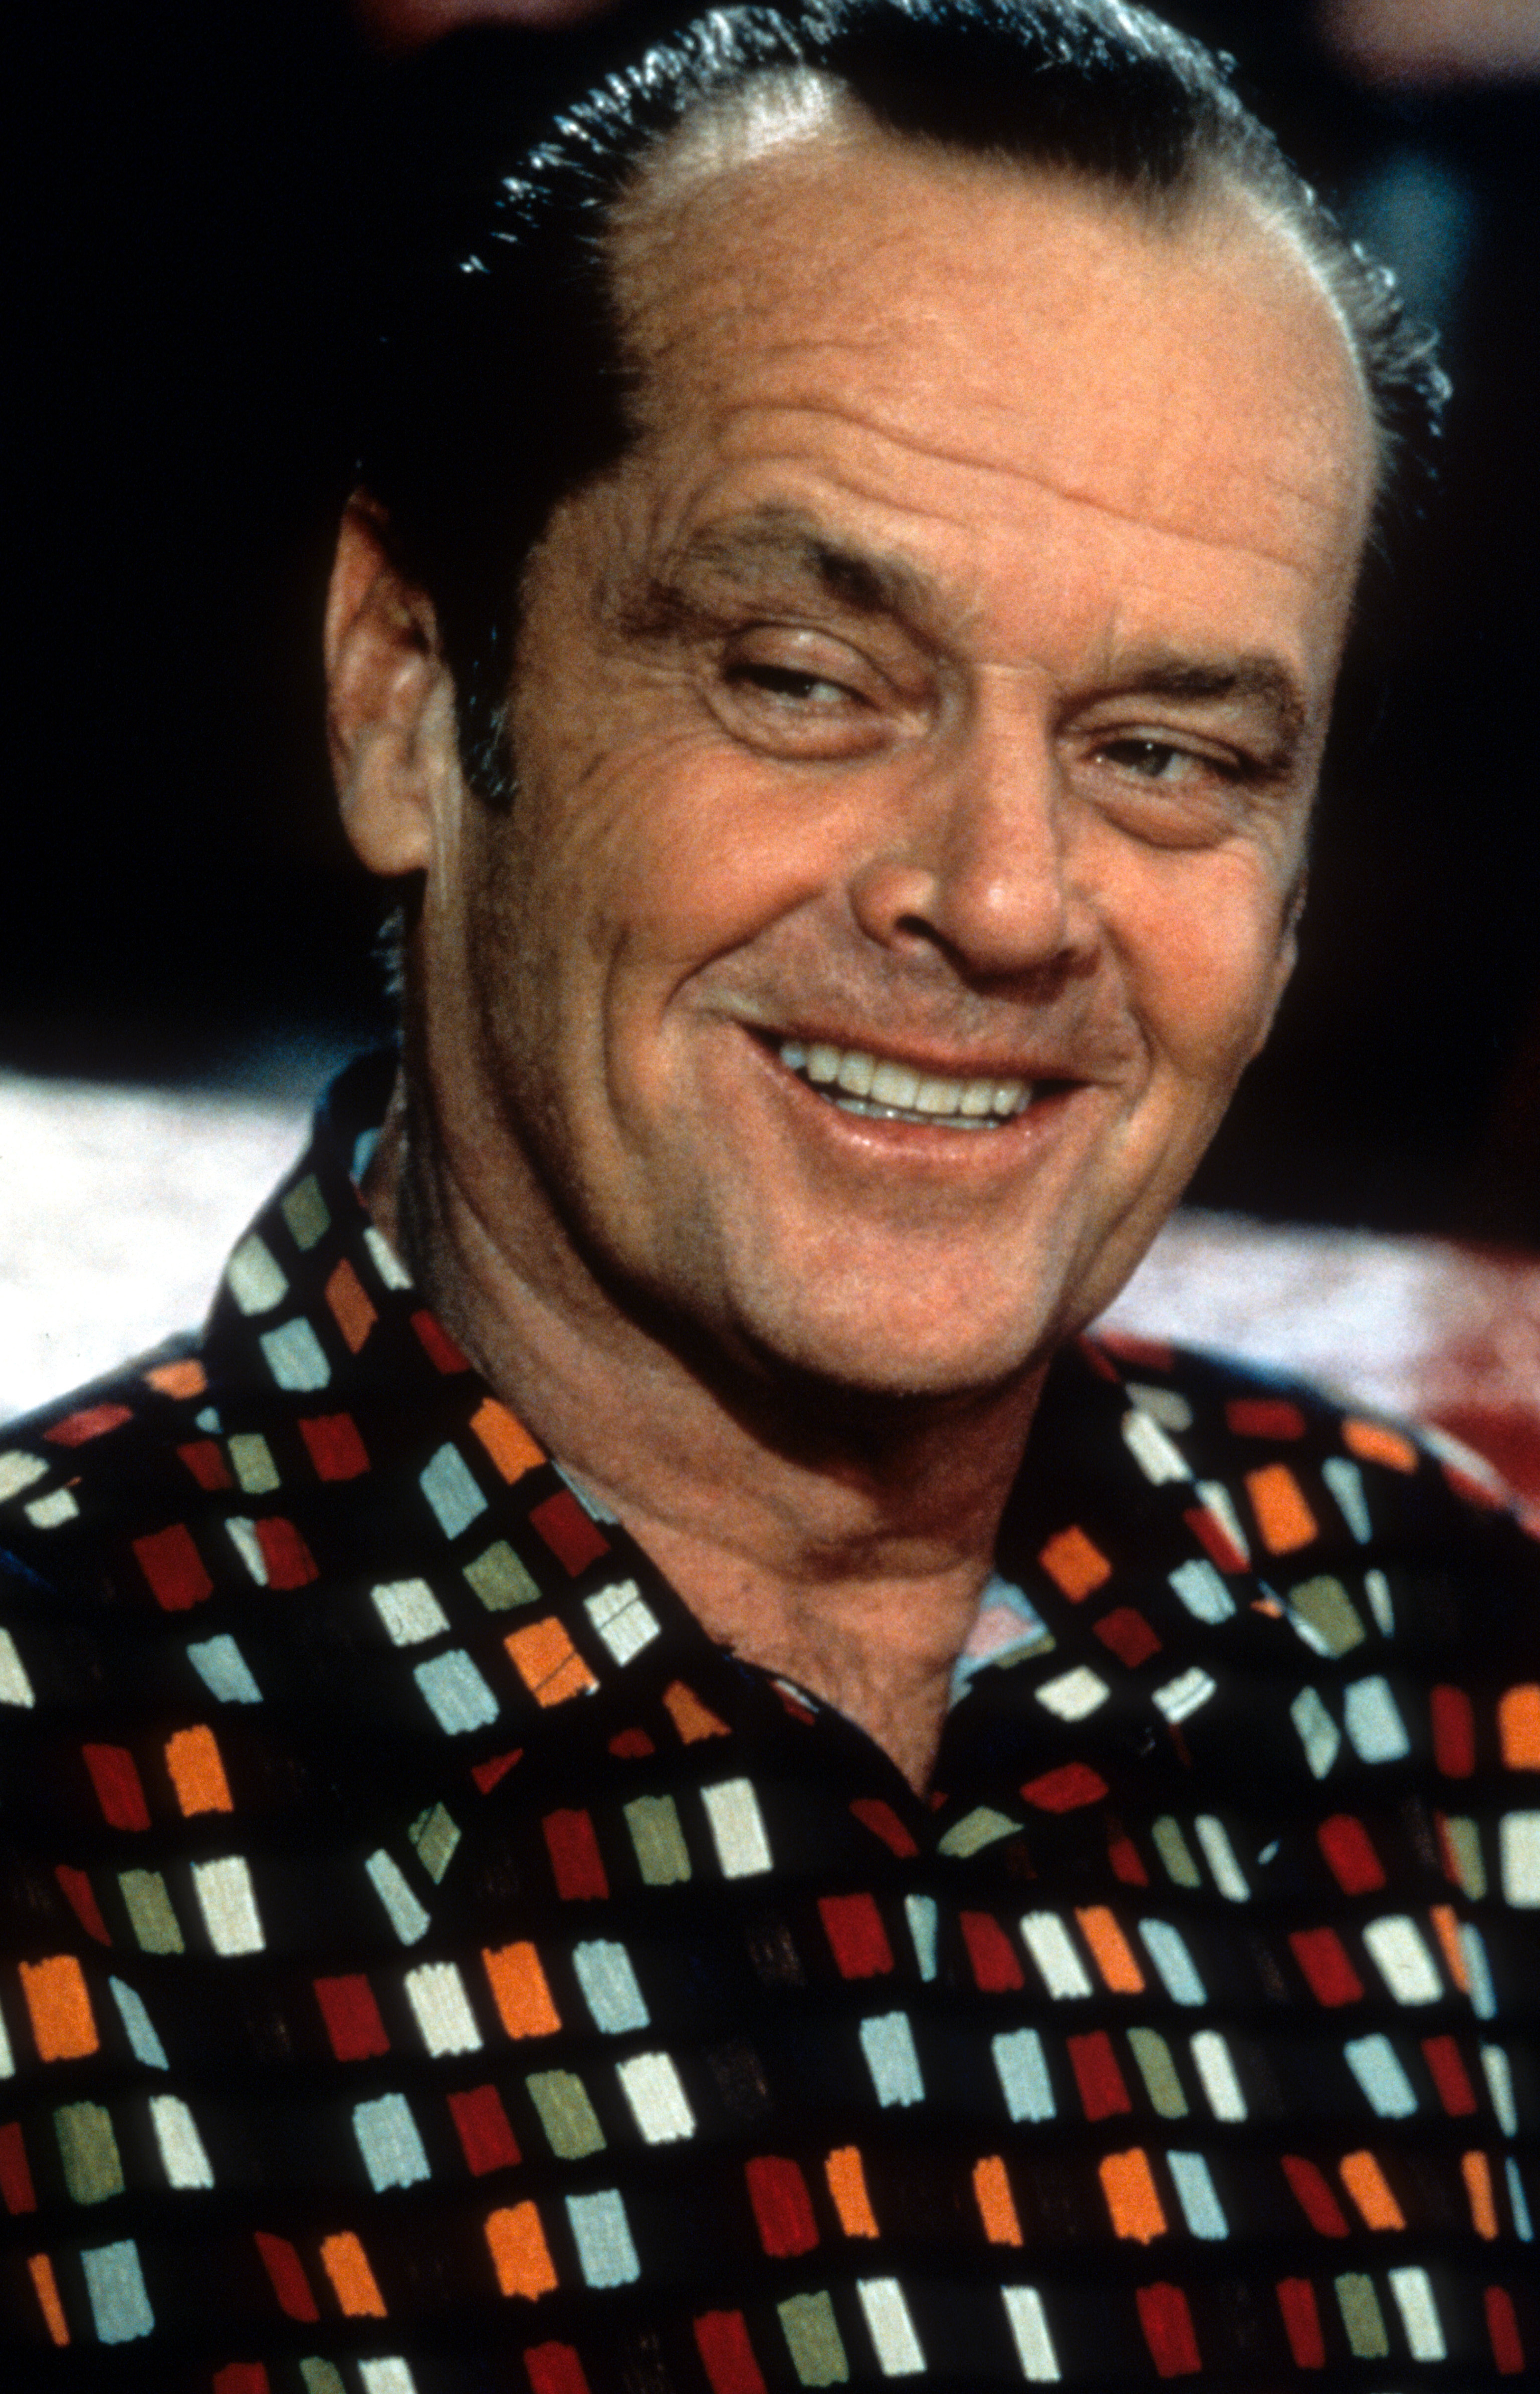 Close-up of Jack smiling and wearing a colorful shirt